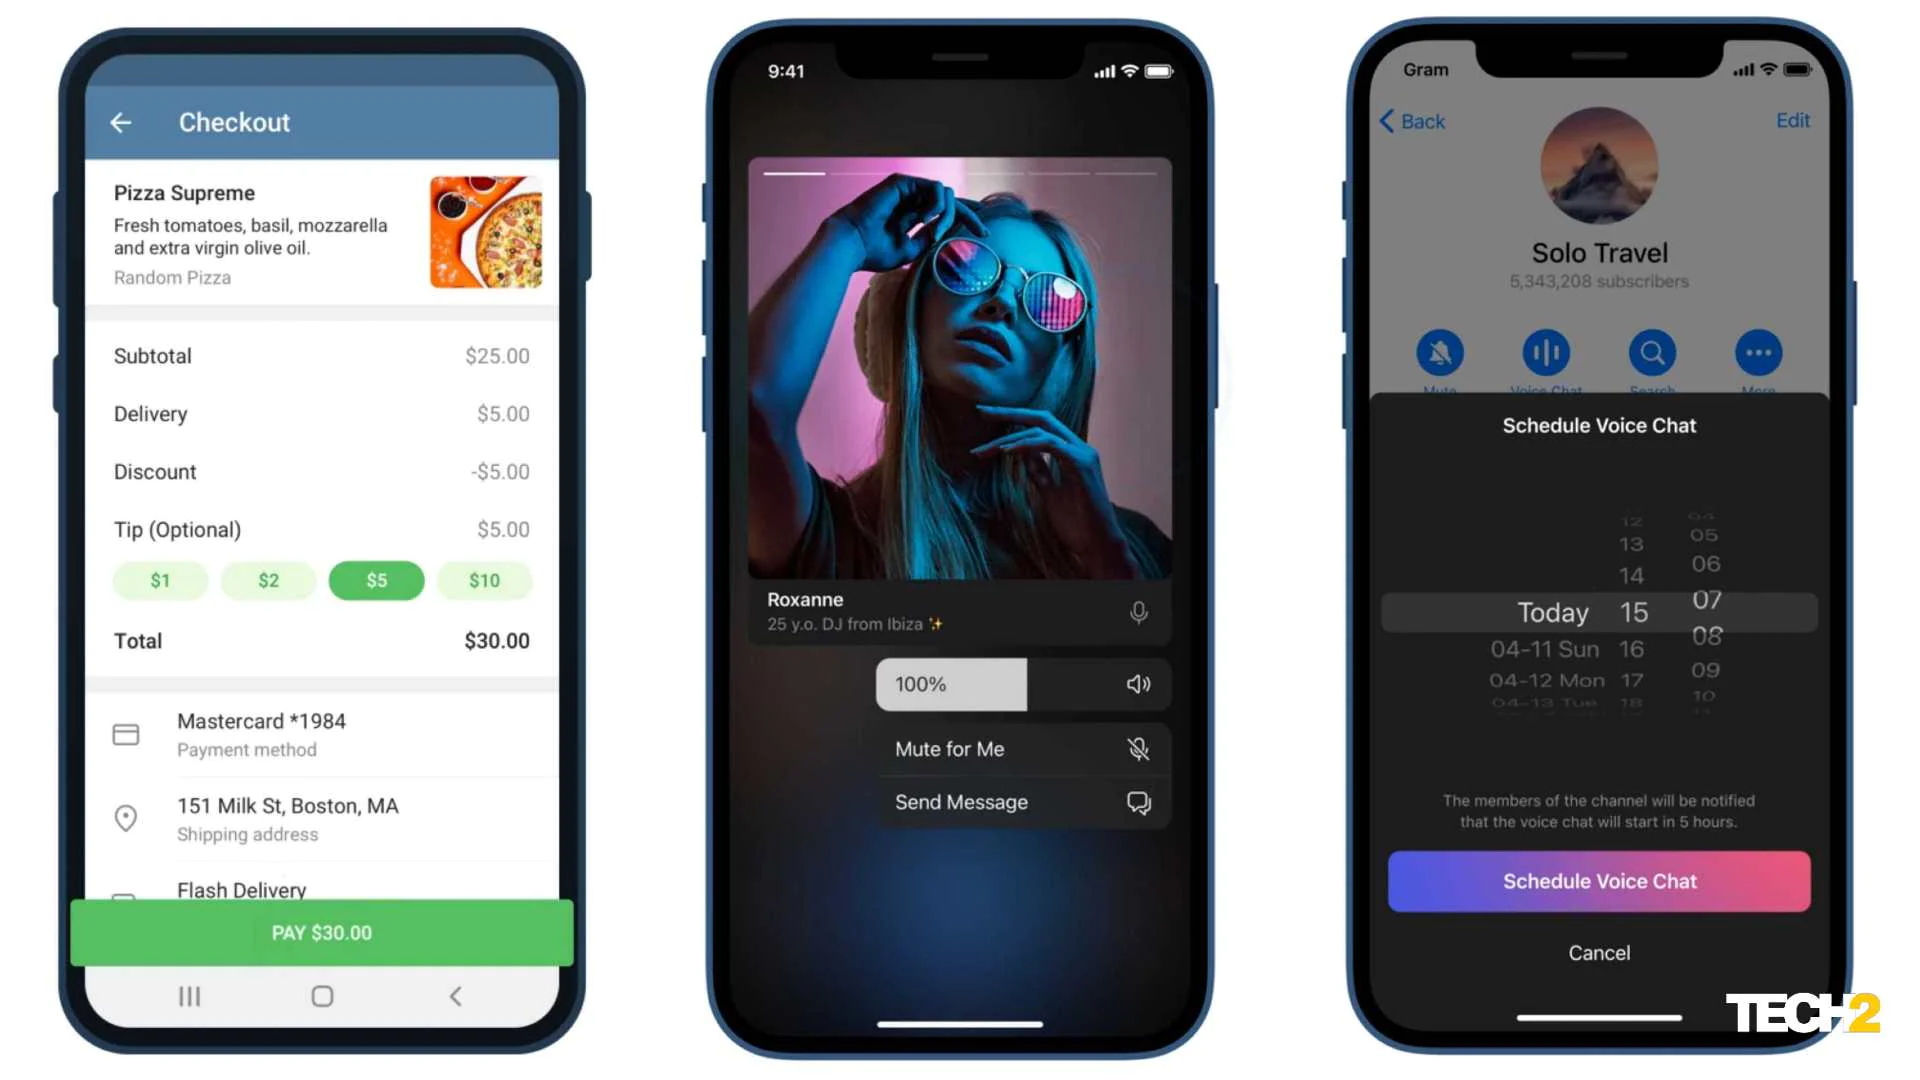 You are currently viewing Telegram’s latest update introduces Payments 2.0, voice chat scheduling and more- Technology News, FP